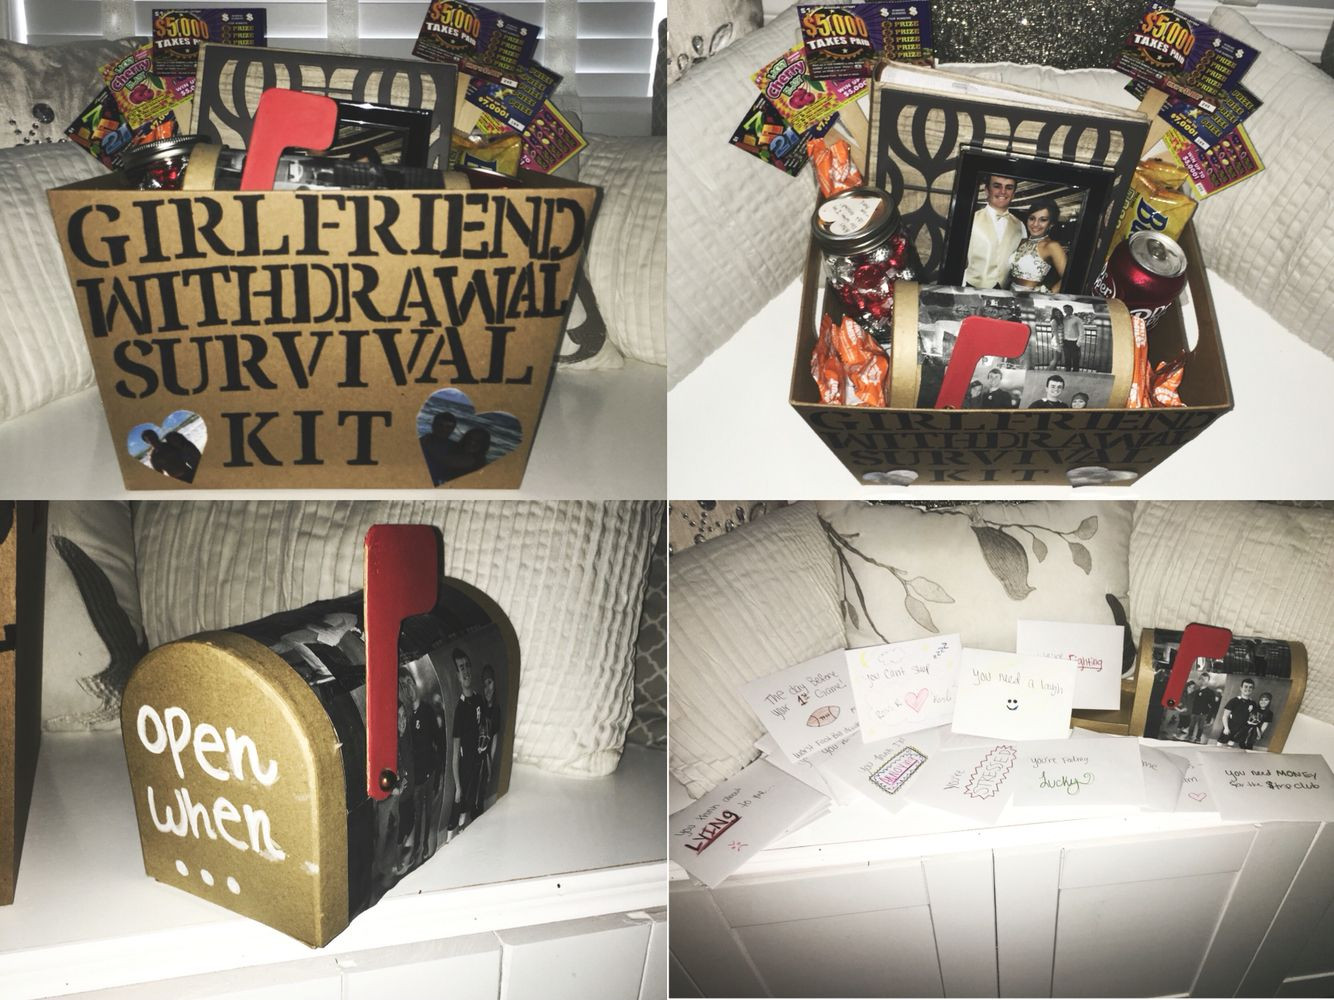 Gift Box Ideas For Girlfriend
 Girlfriend withdrawal survival kit and open when letters